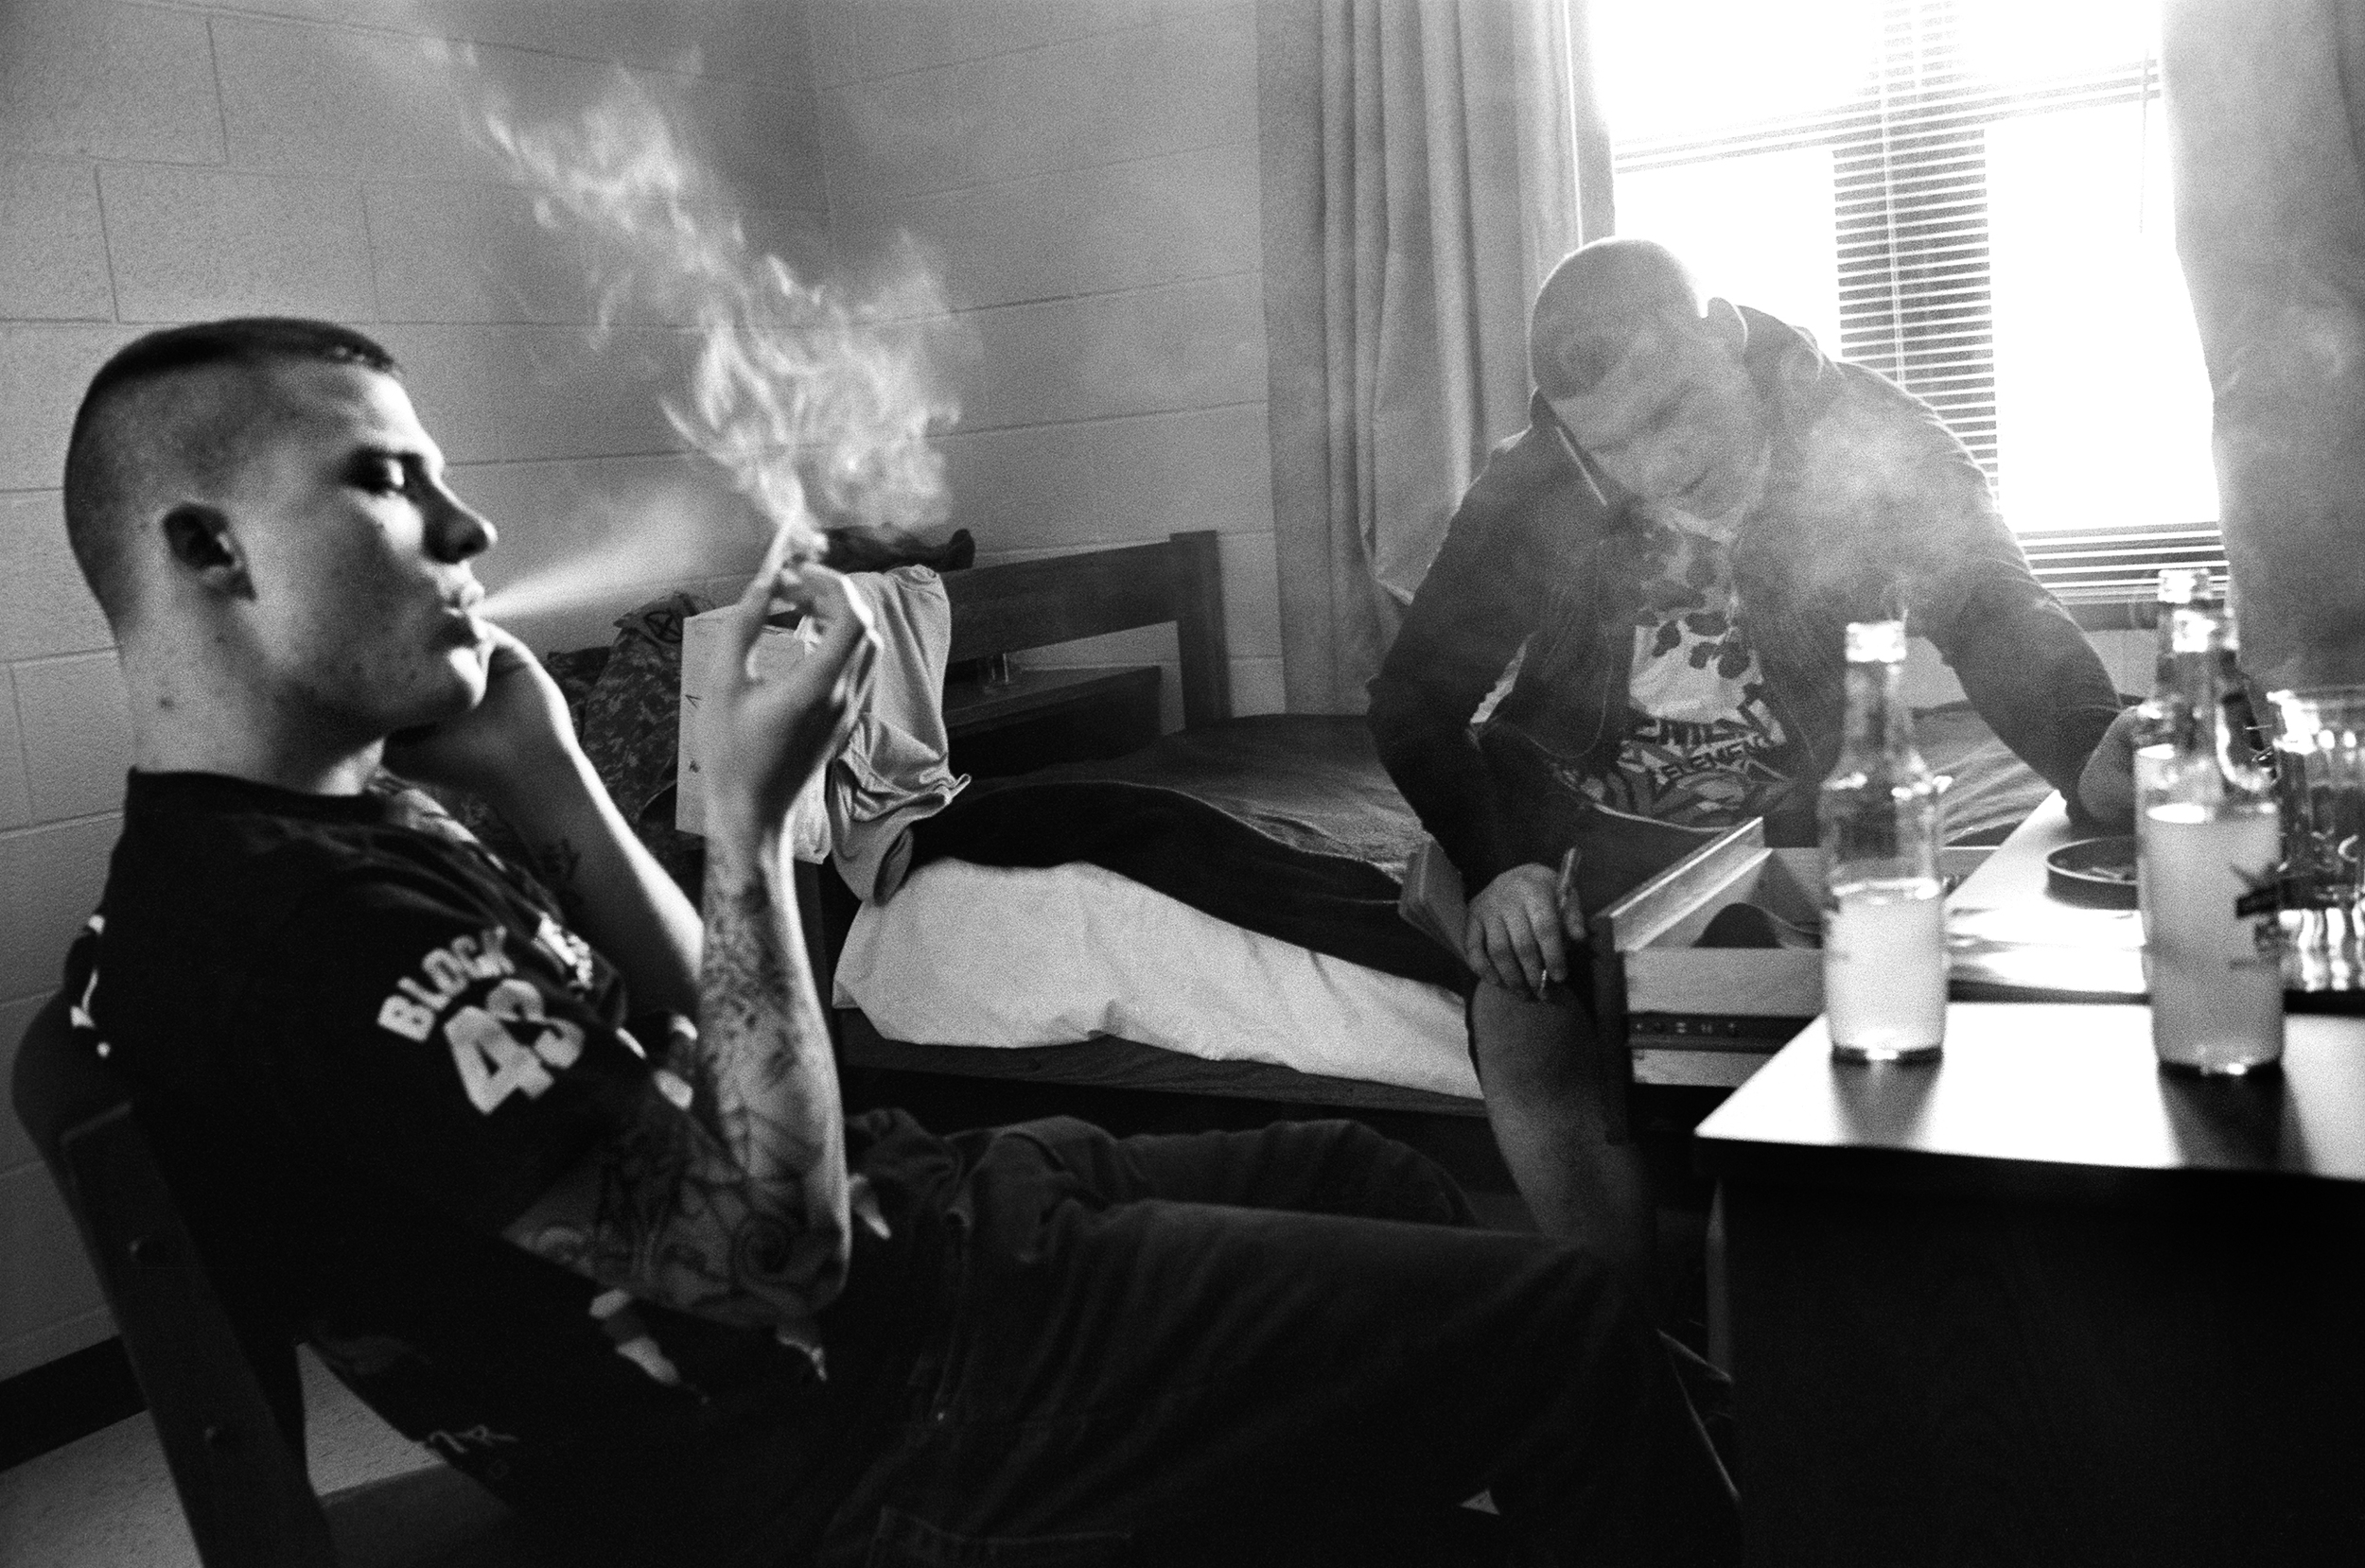  SPC Ryan Cooley and SPC Adam Ramsey smoke cigarettes in the barracks at Fort Drum, New York,&nbsp;2010. 